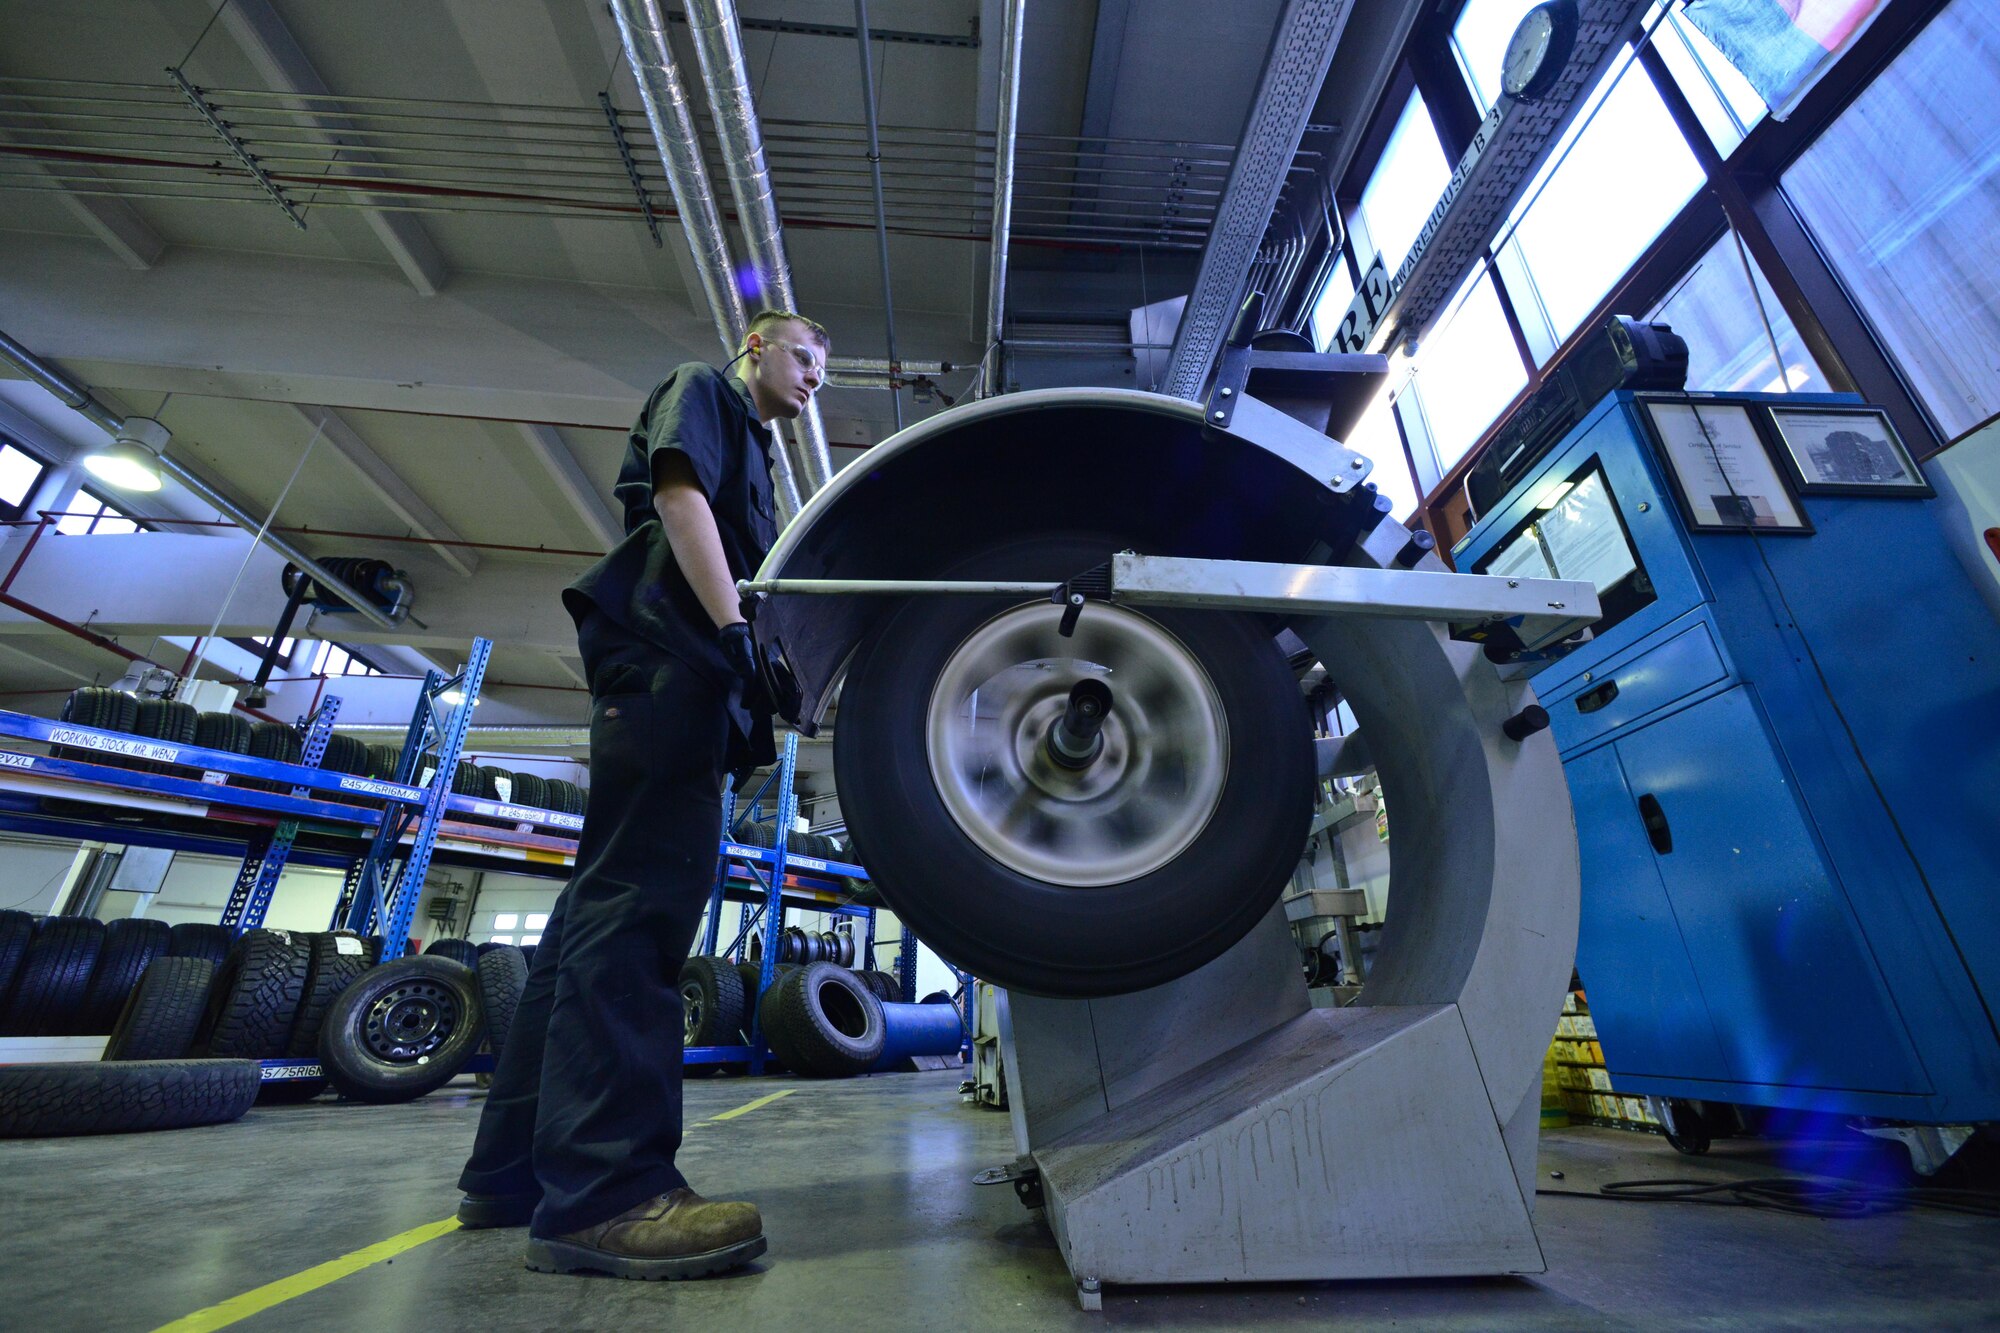 Airman 1st Class Austin Conway checks the pressure in a tire Jan. 14, 2015, at Ramstein Air Base, Germany. The 86th Vehicle Readiness Squadron is responsible for servicing more than 1000 vehicles on and off base. Conway is a 86th VRS general purpose light vehicle mechanic. (U.S. Air Force photo/Senior Airman Nicole Sikorski)